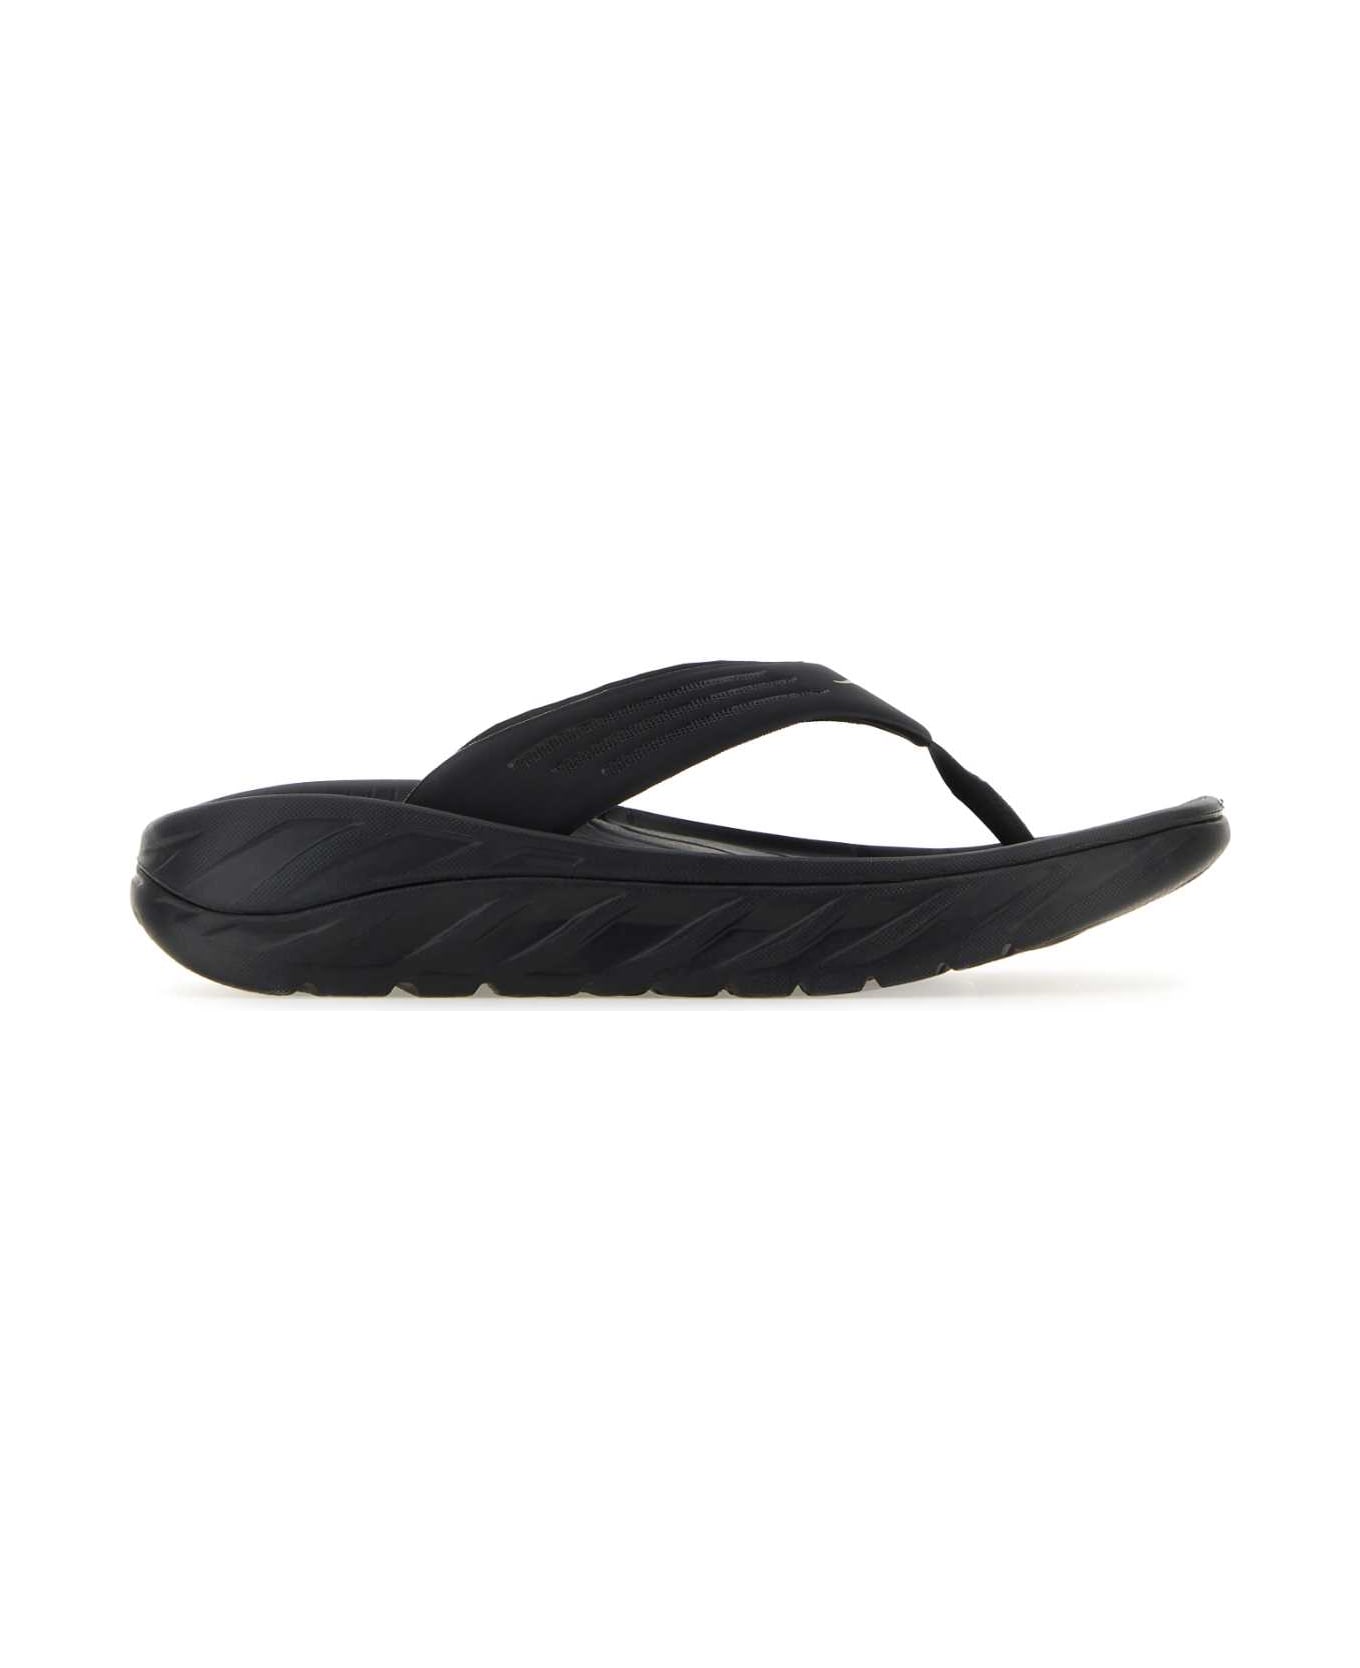 Hoka Black Rubber Recovery Thong Slippers - BLACKDARKGULLGRAY その他各種シューズ